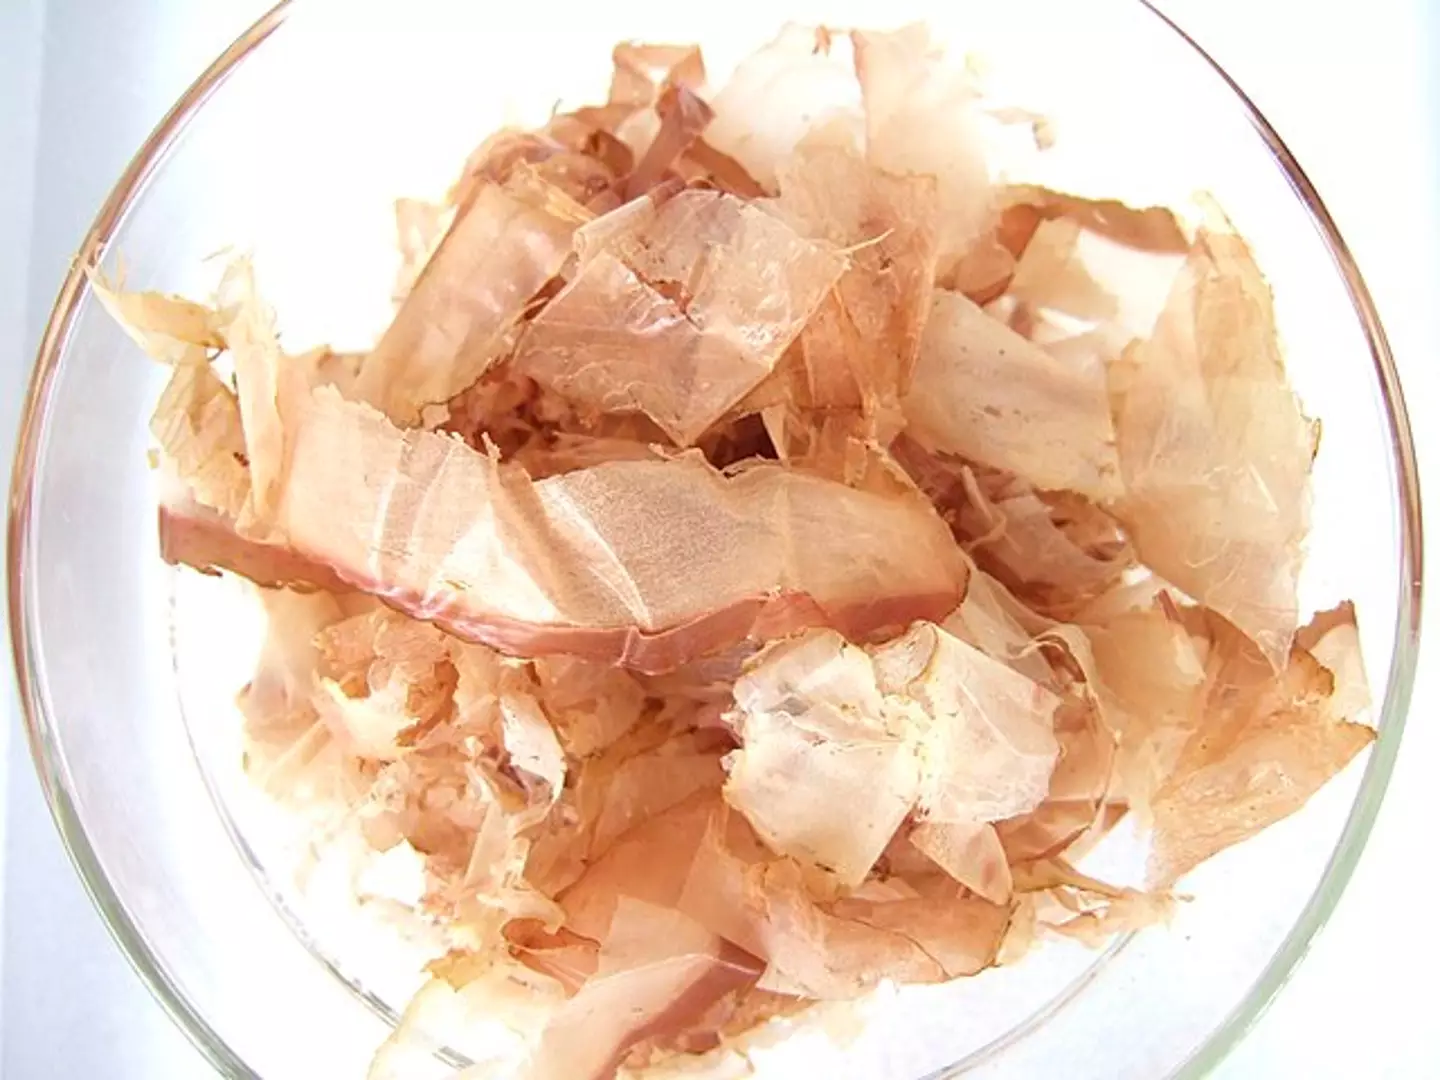 Bonito flakes are so fine that they look like they're dancing when they're added to hot food.